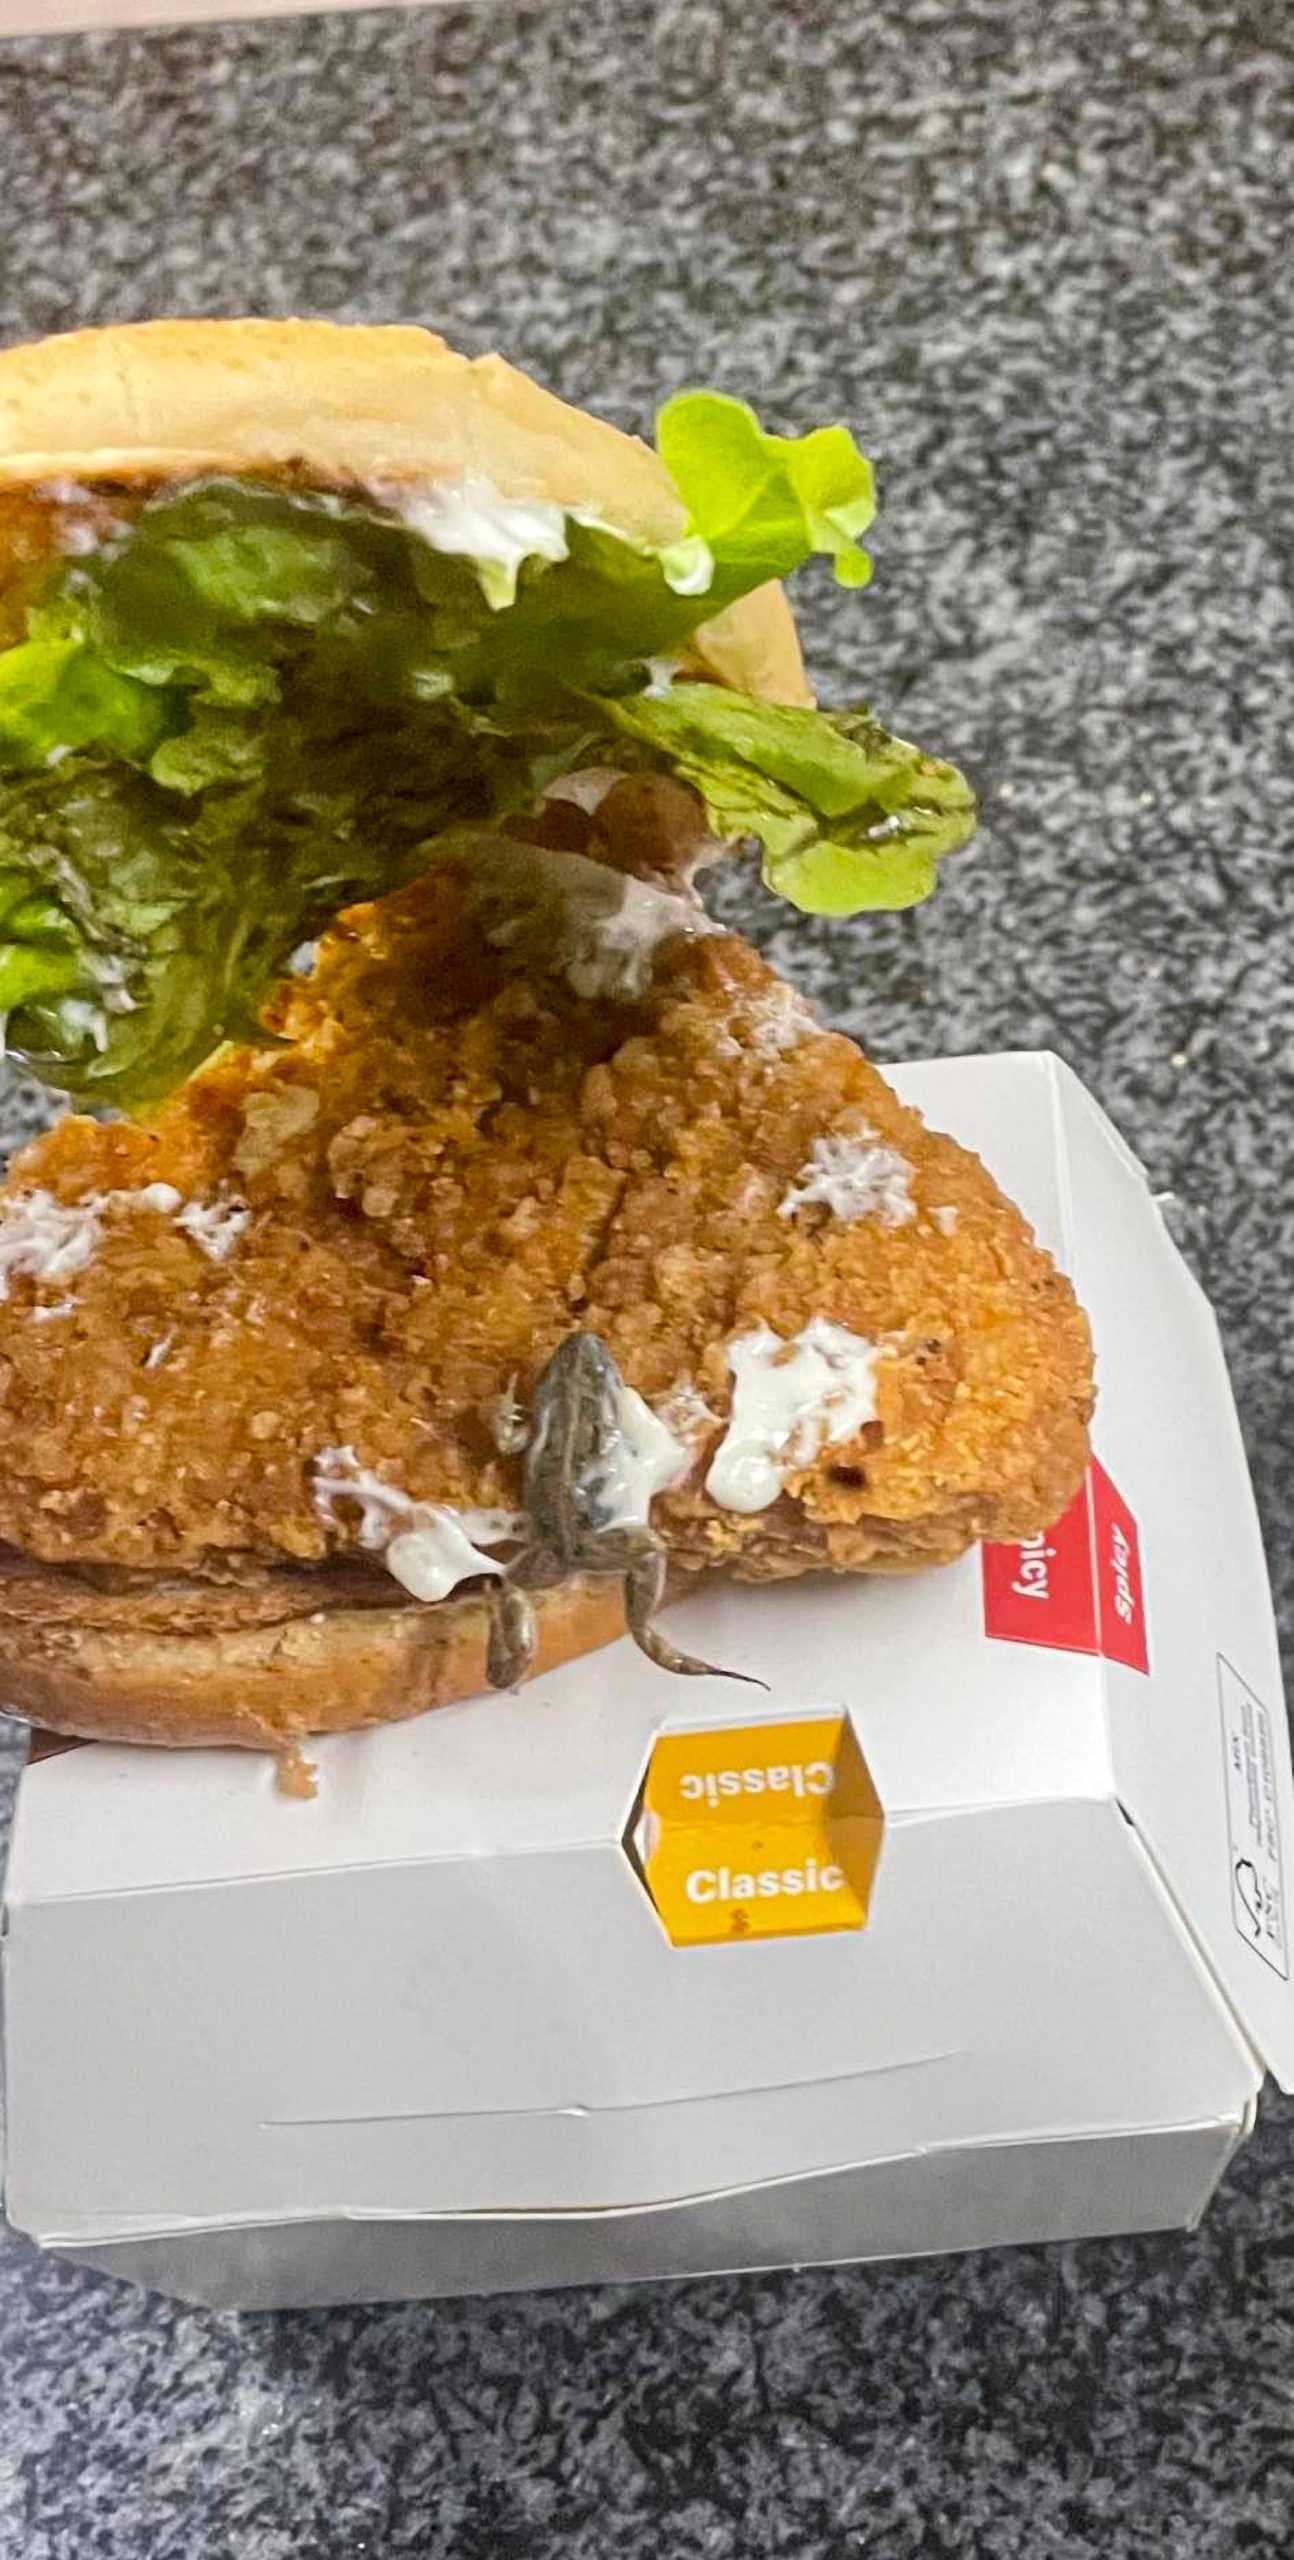 Read more about the article McFROGGIE: Outraged Dad Finds Dead Frog In McDonalds Burger